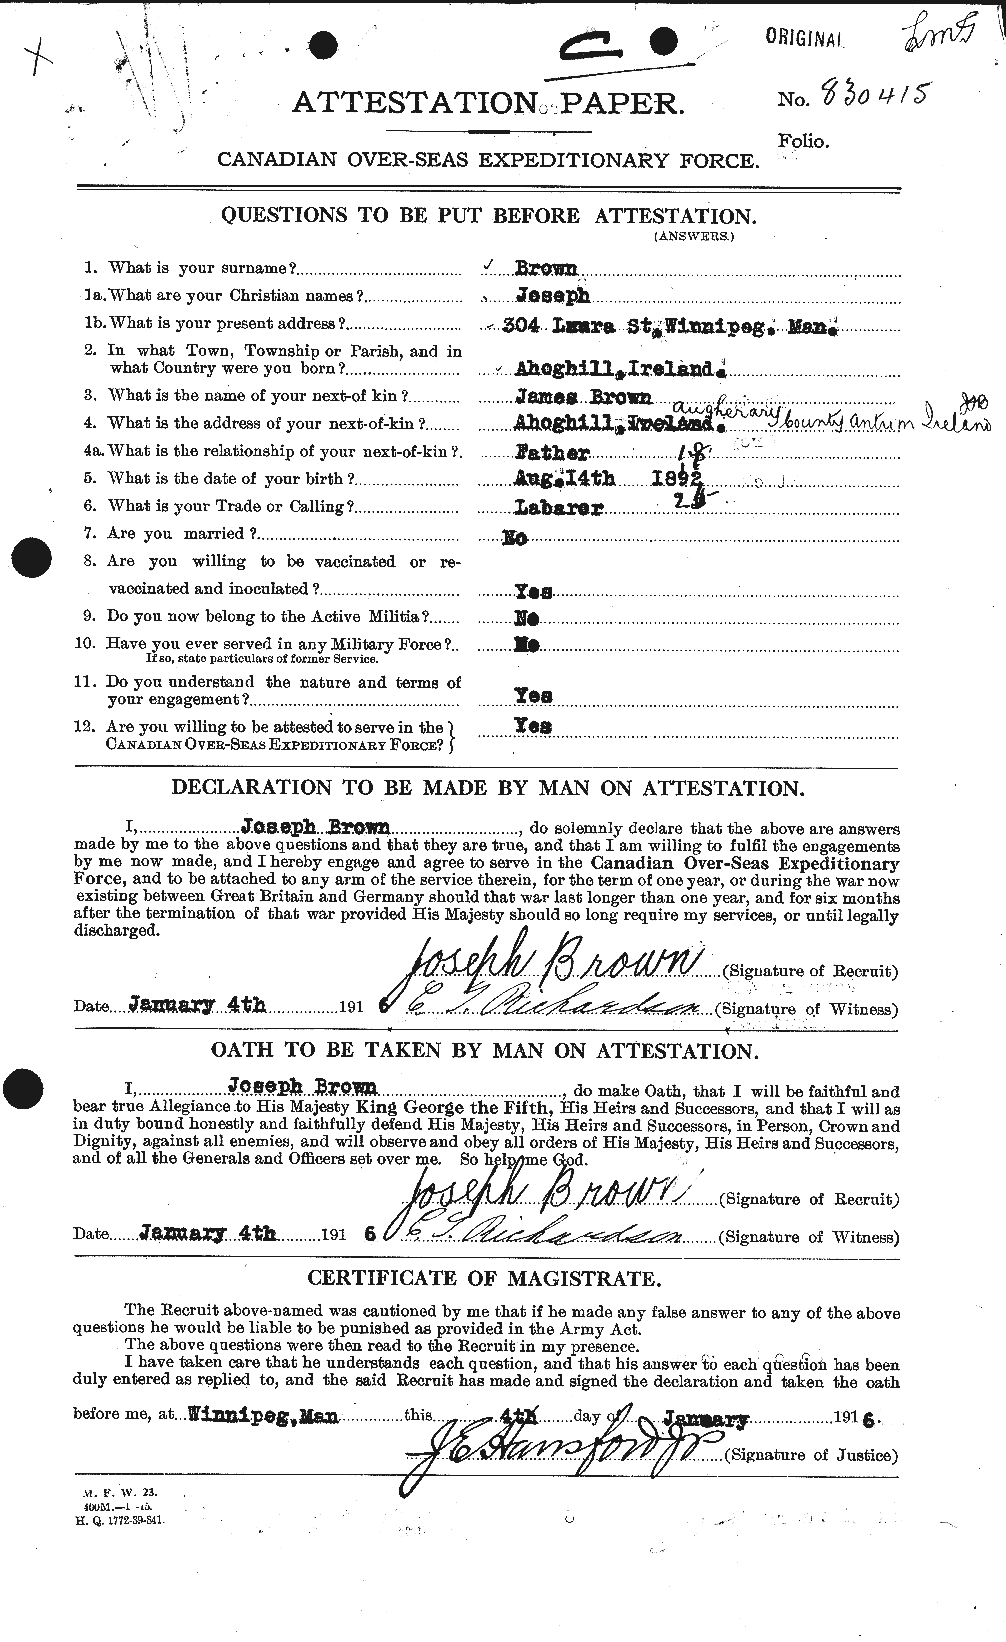 Personnel Records of the First World War - CEF 265927a